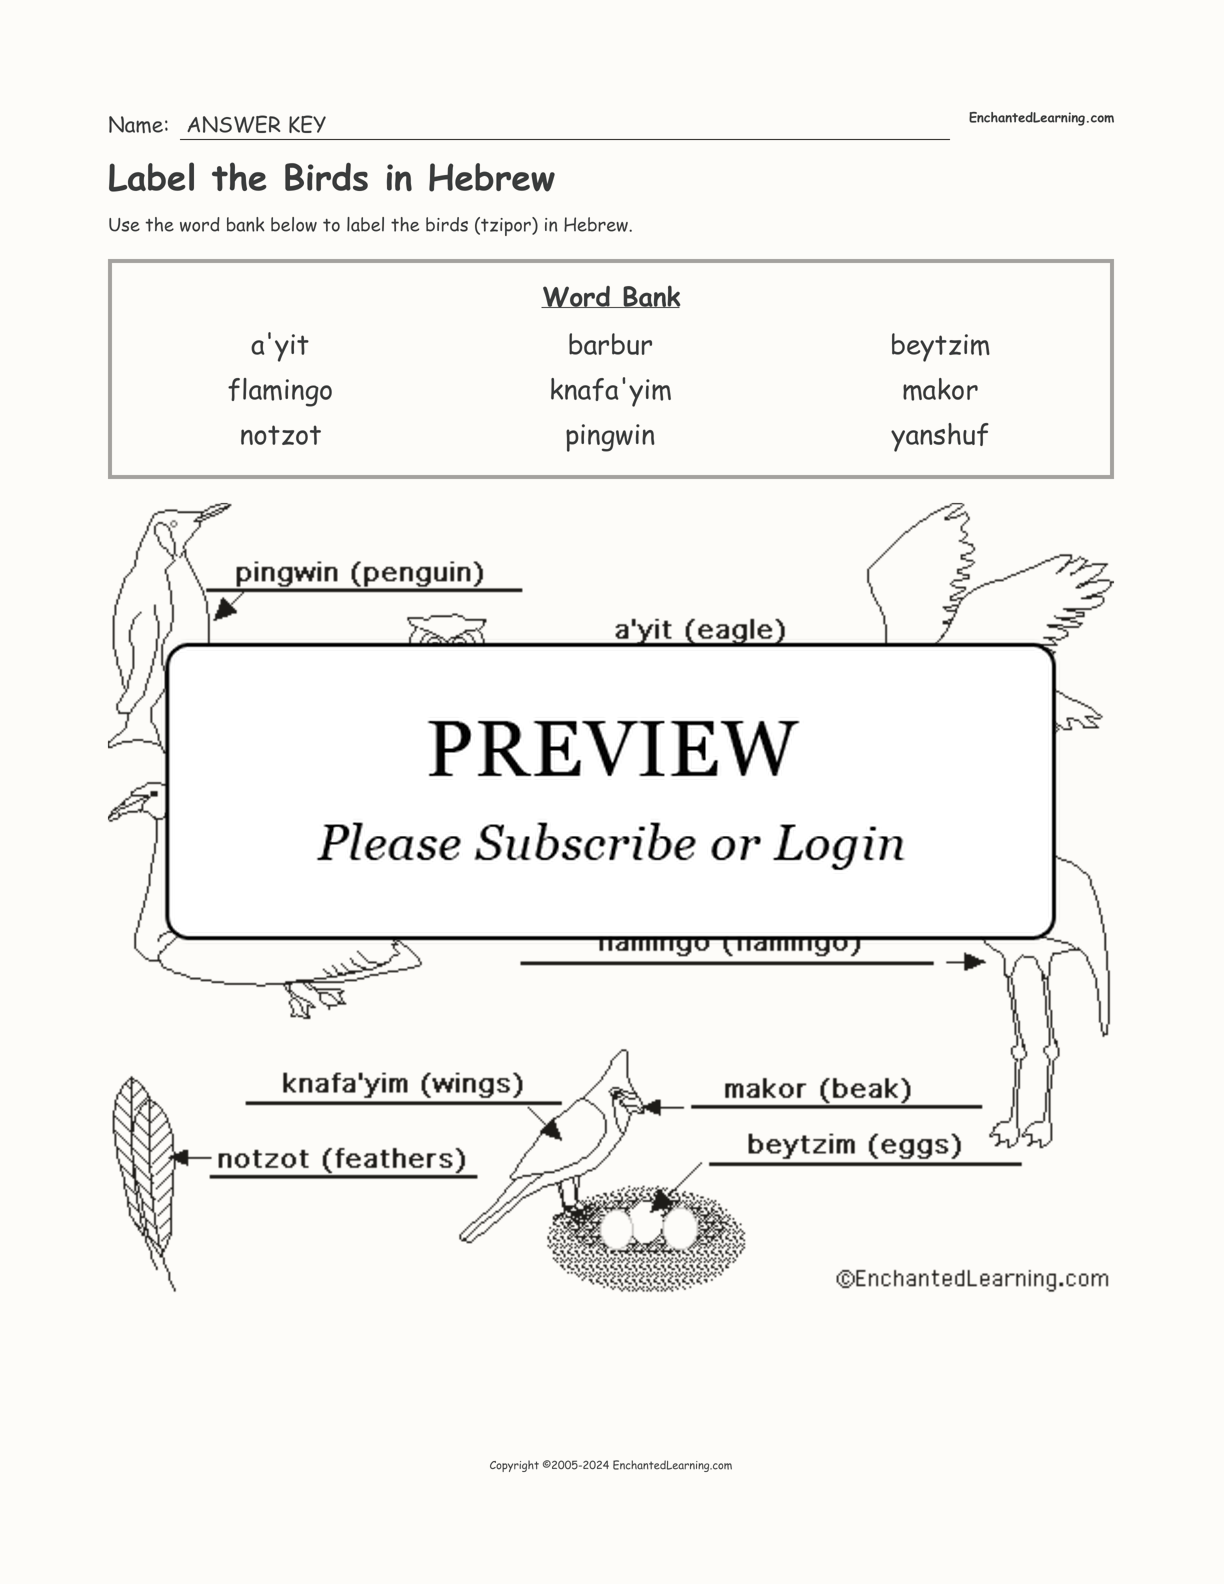 Label the Birds in Hebrew interactive worksheet page 2